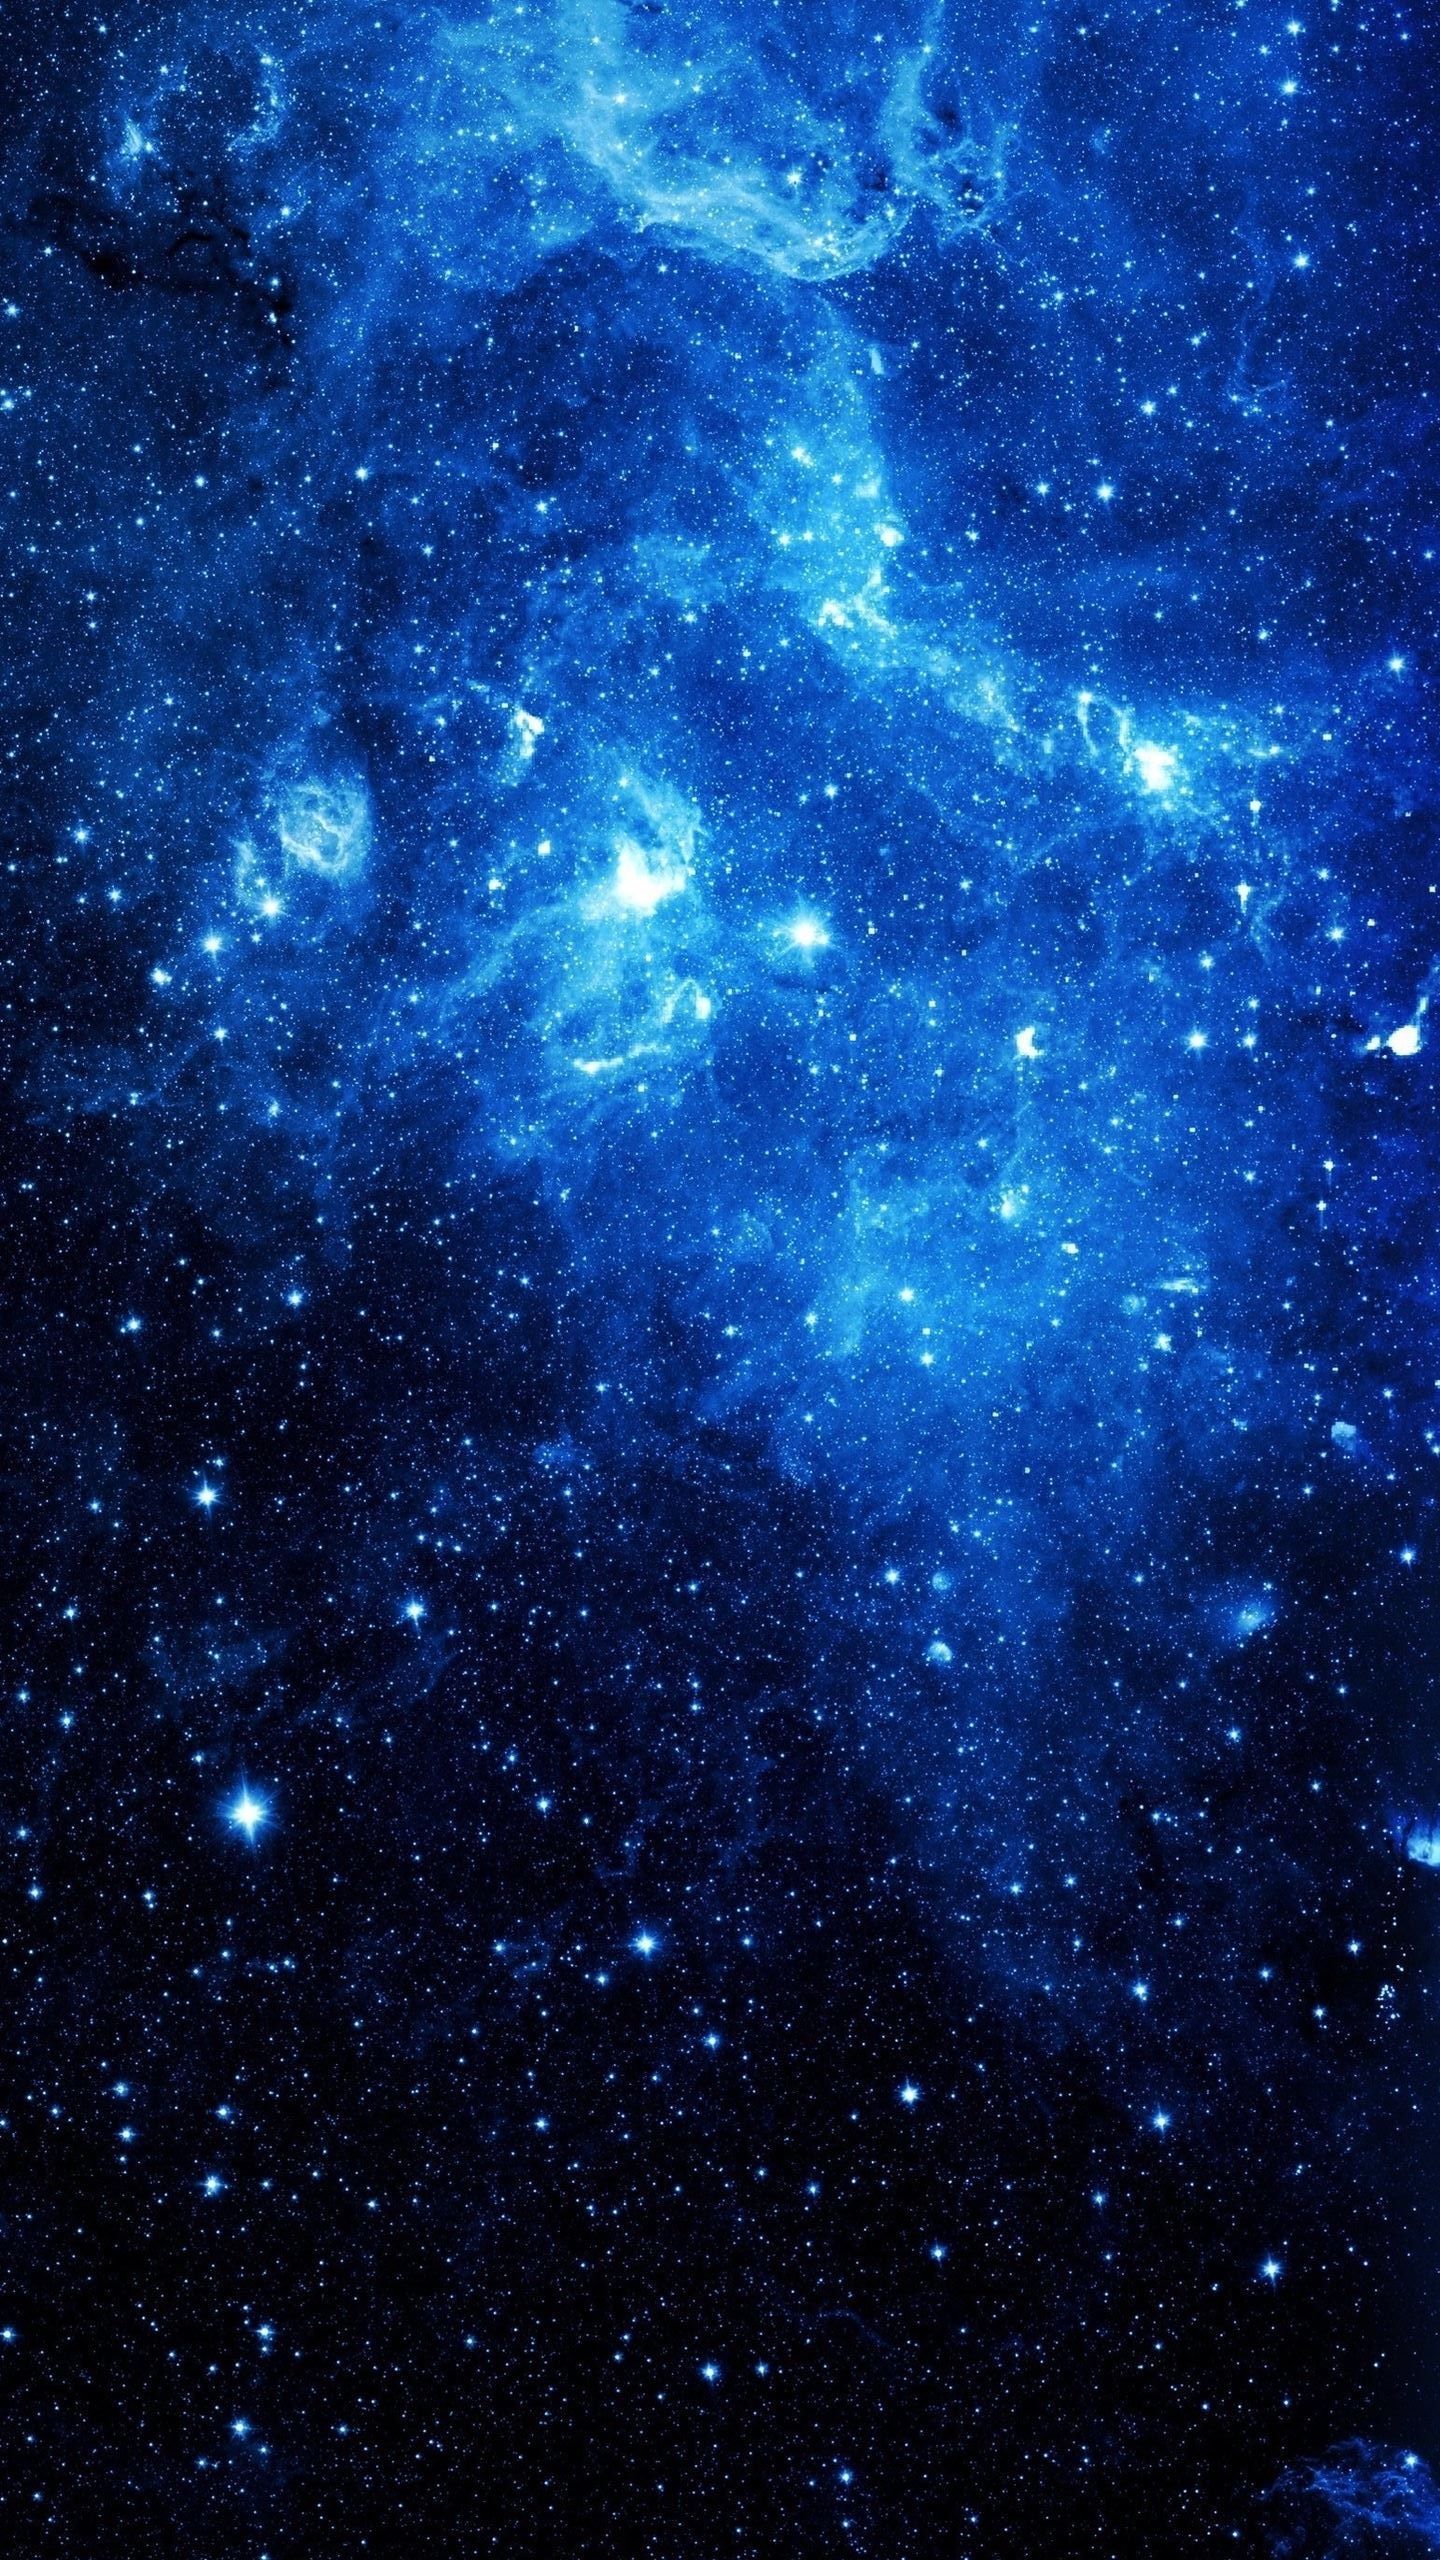 124100 Blue Galaxy Stock Photos Pictures  RoyaltyFree Images  iStock   Blue galaxy background